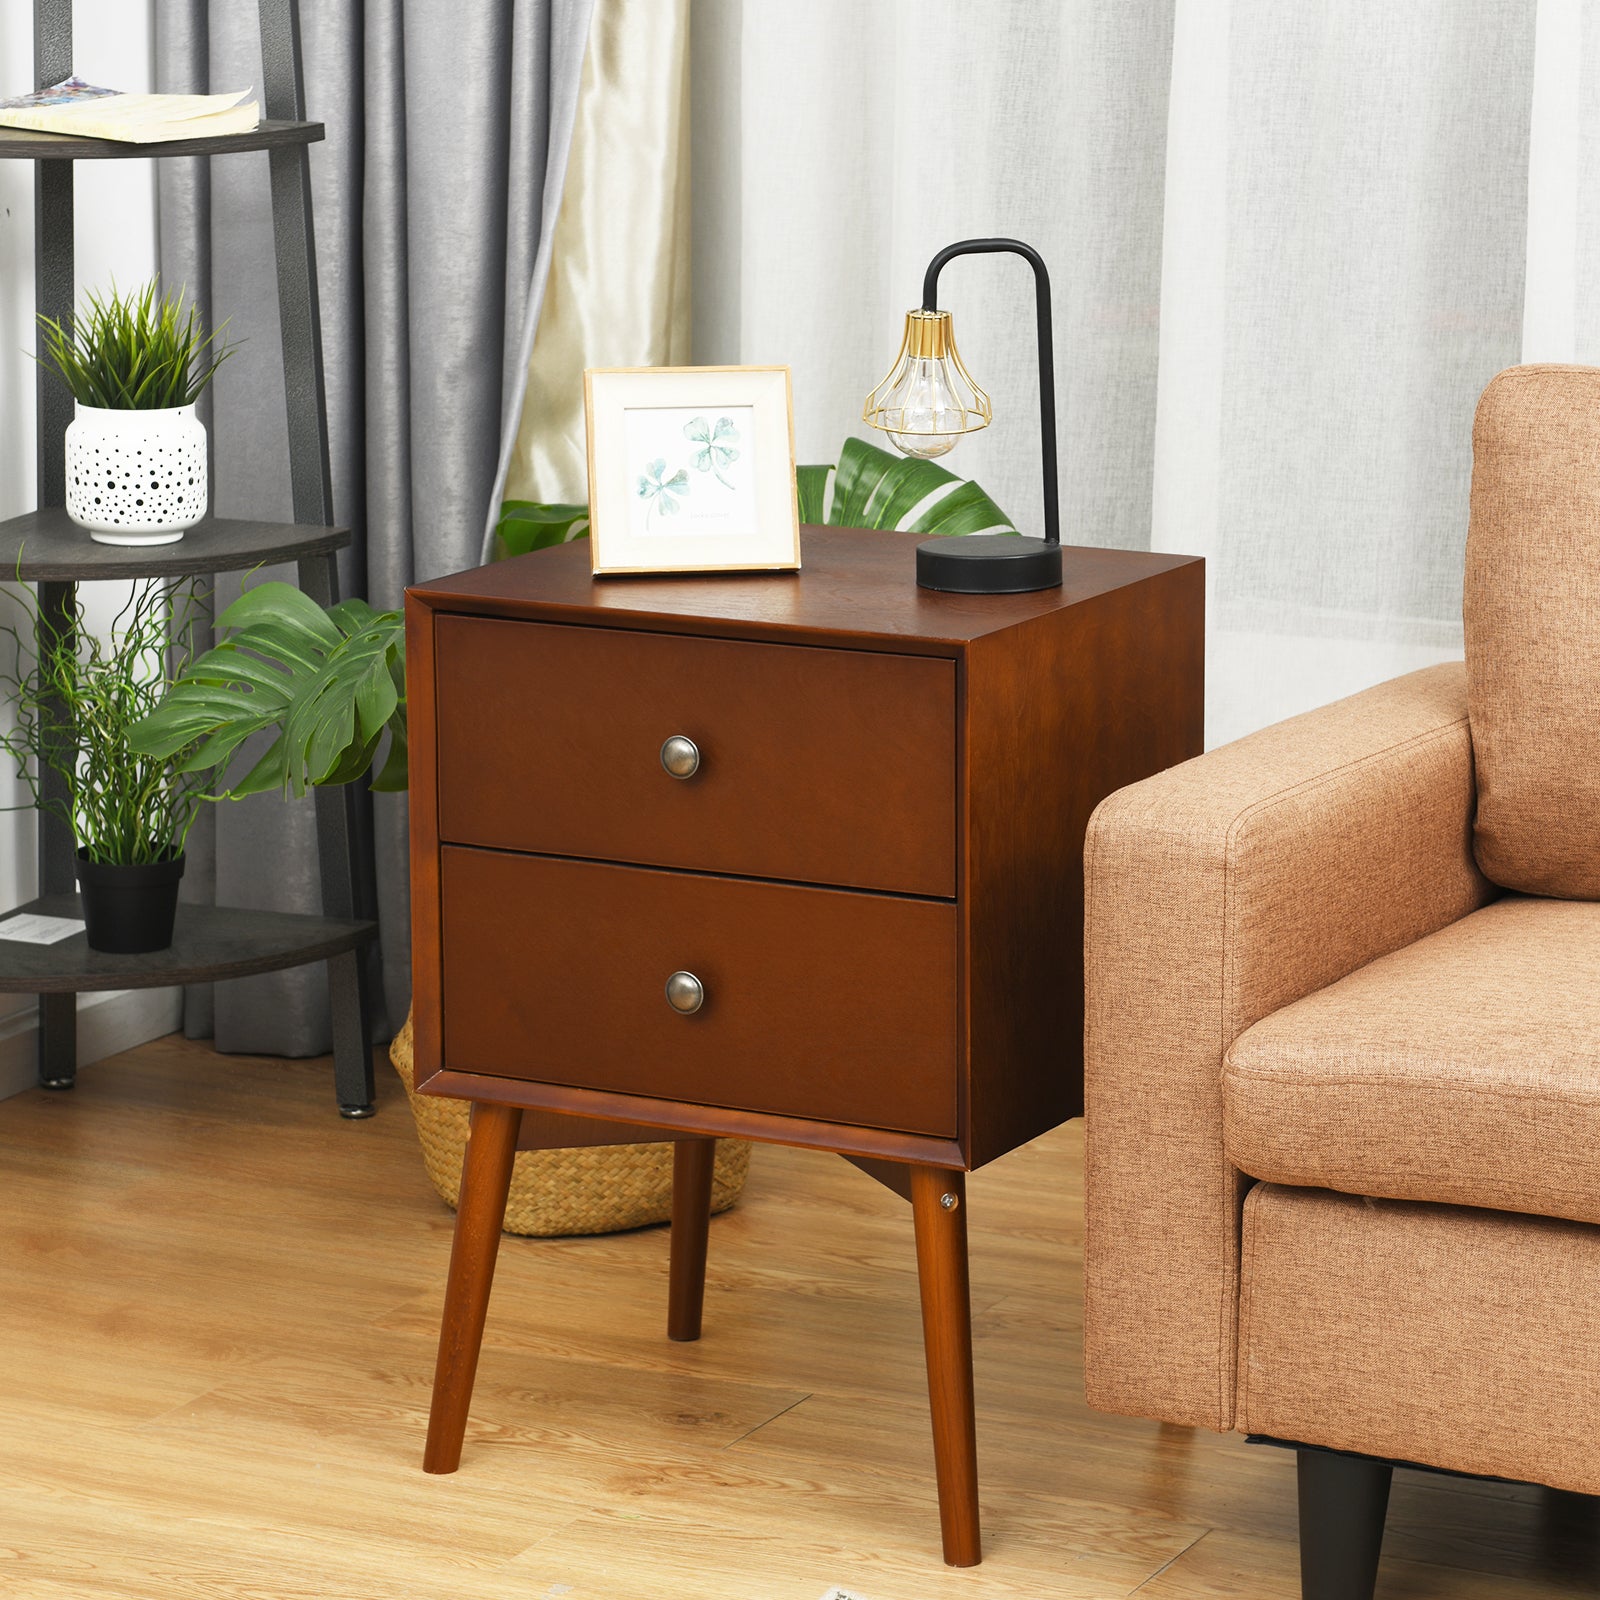 Giantex End Table with Drawers and Metal Knobs(1, Brown)